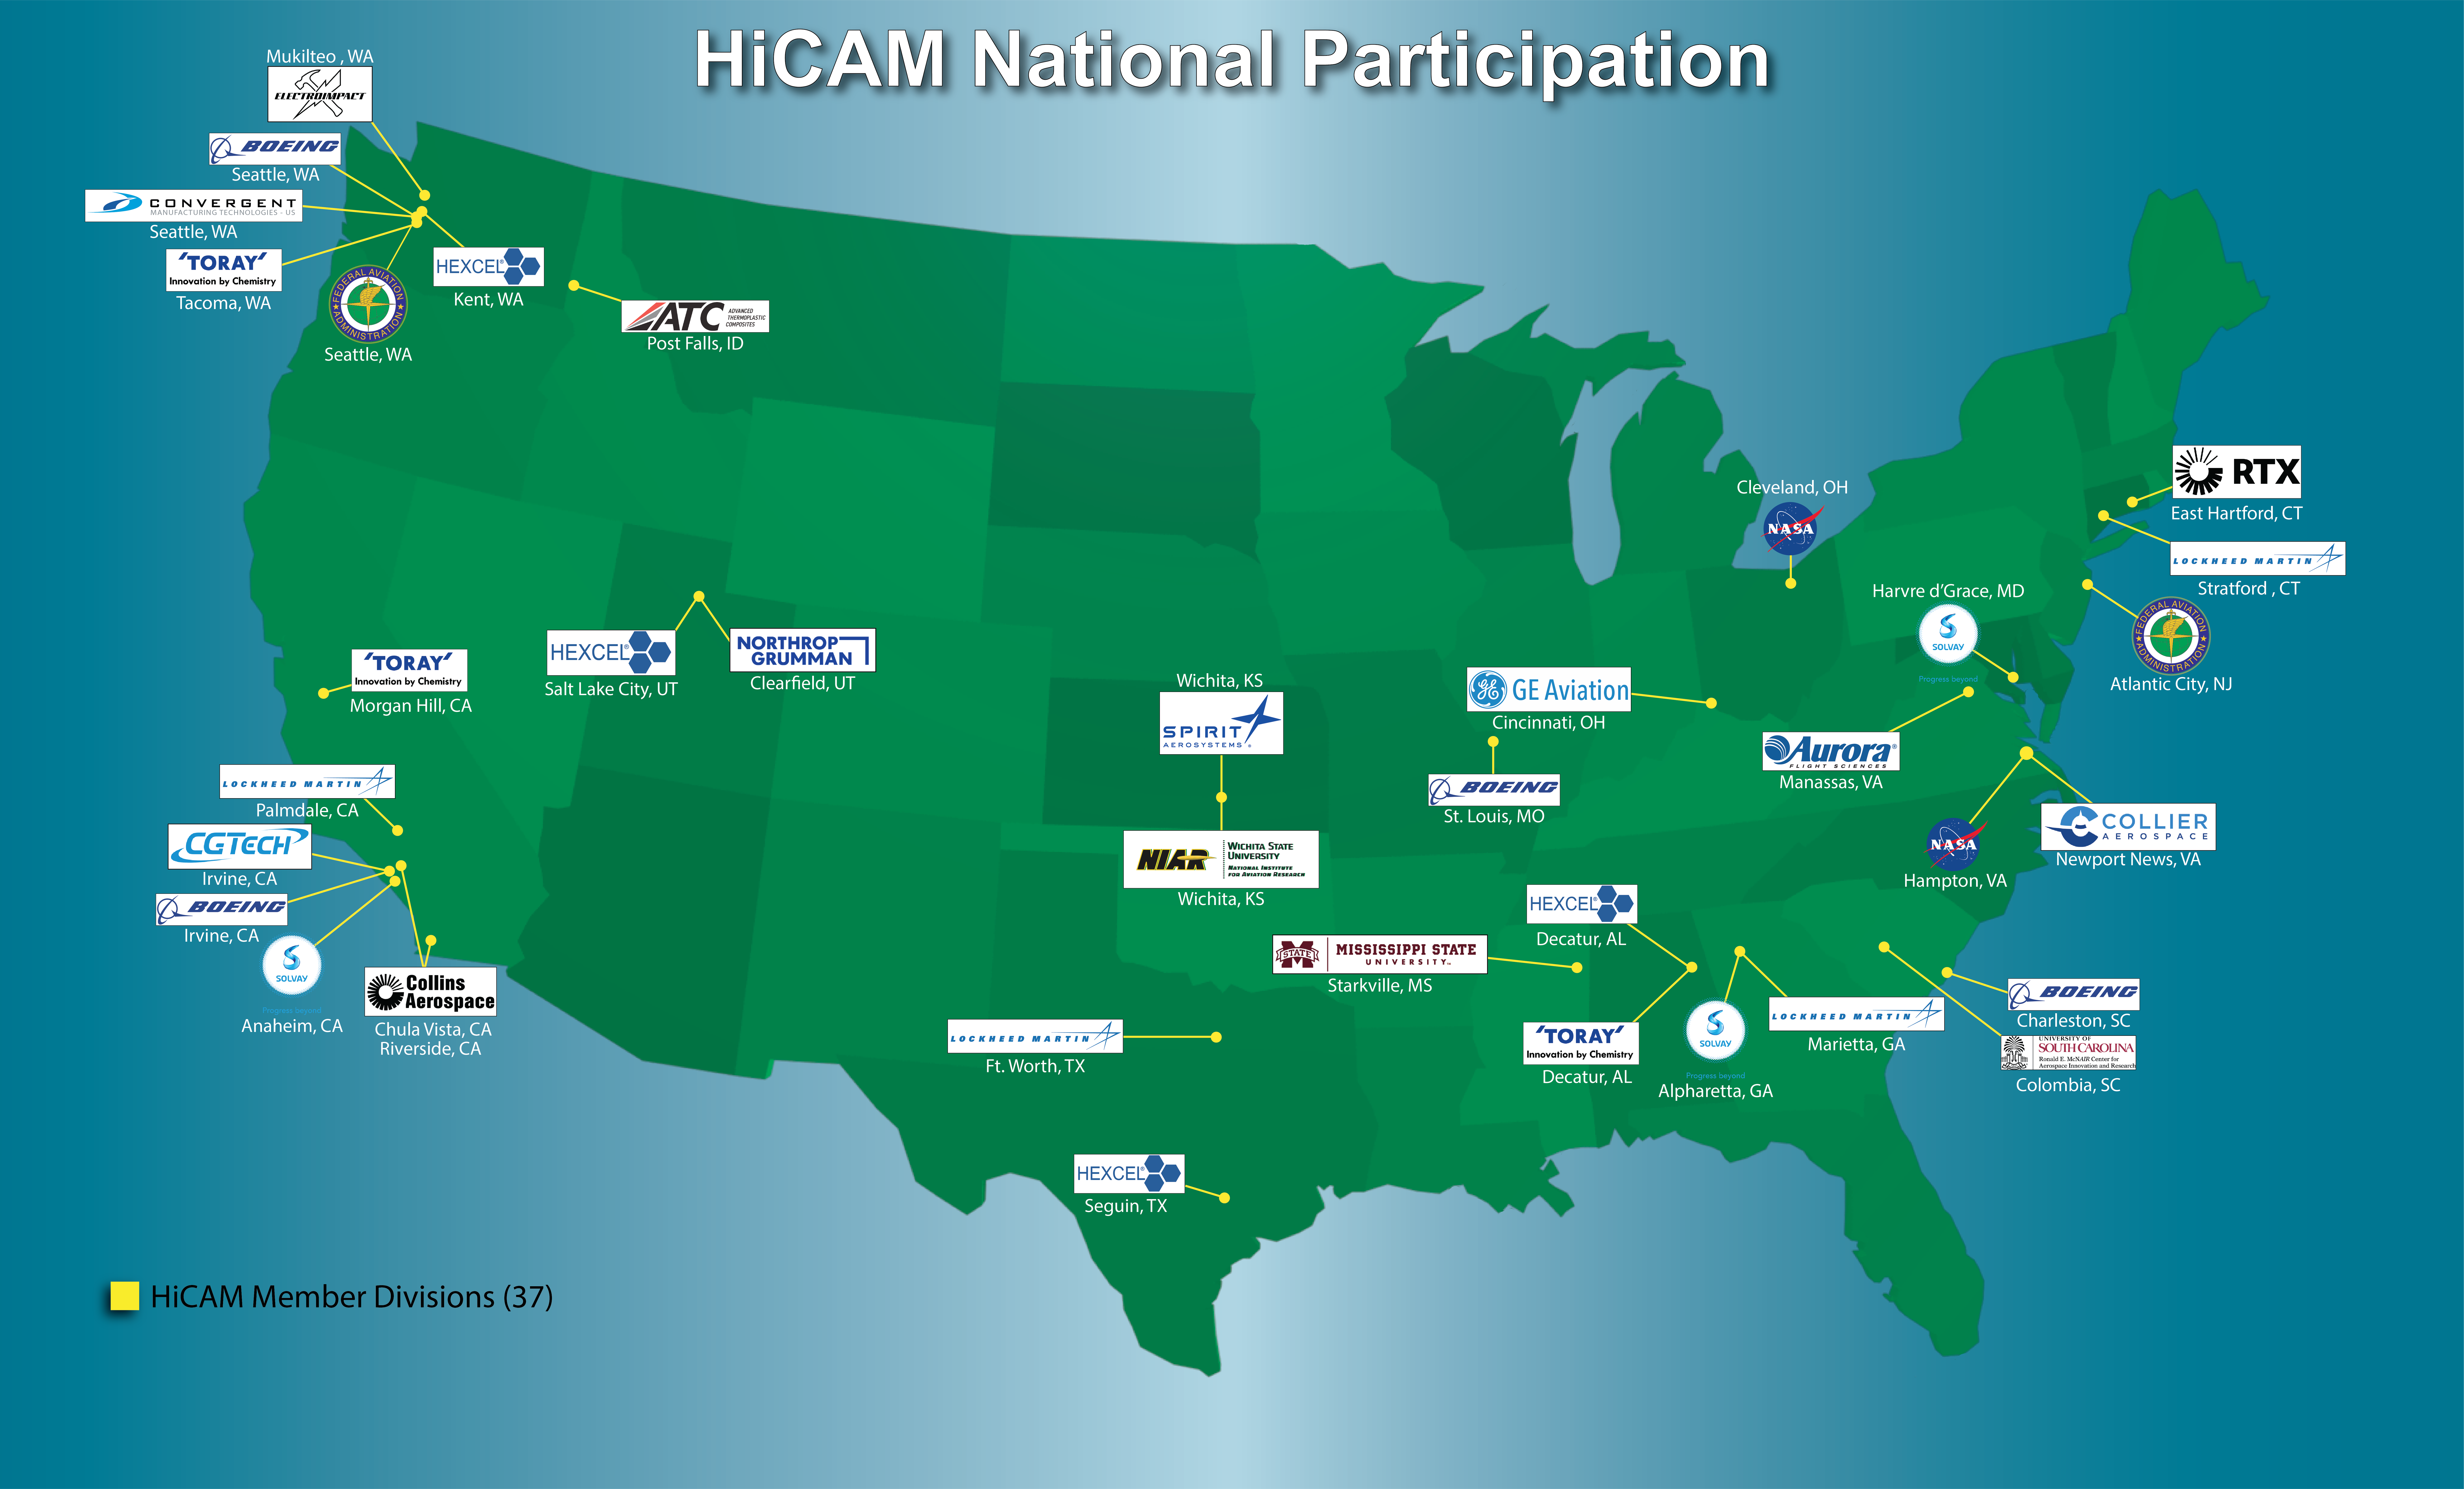 Map of US showing the HiCAM National Participation.